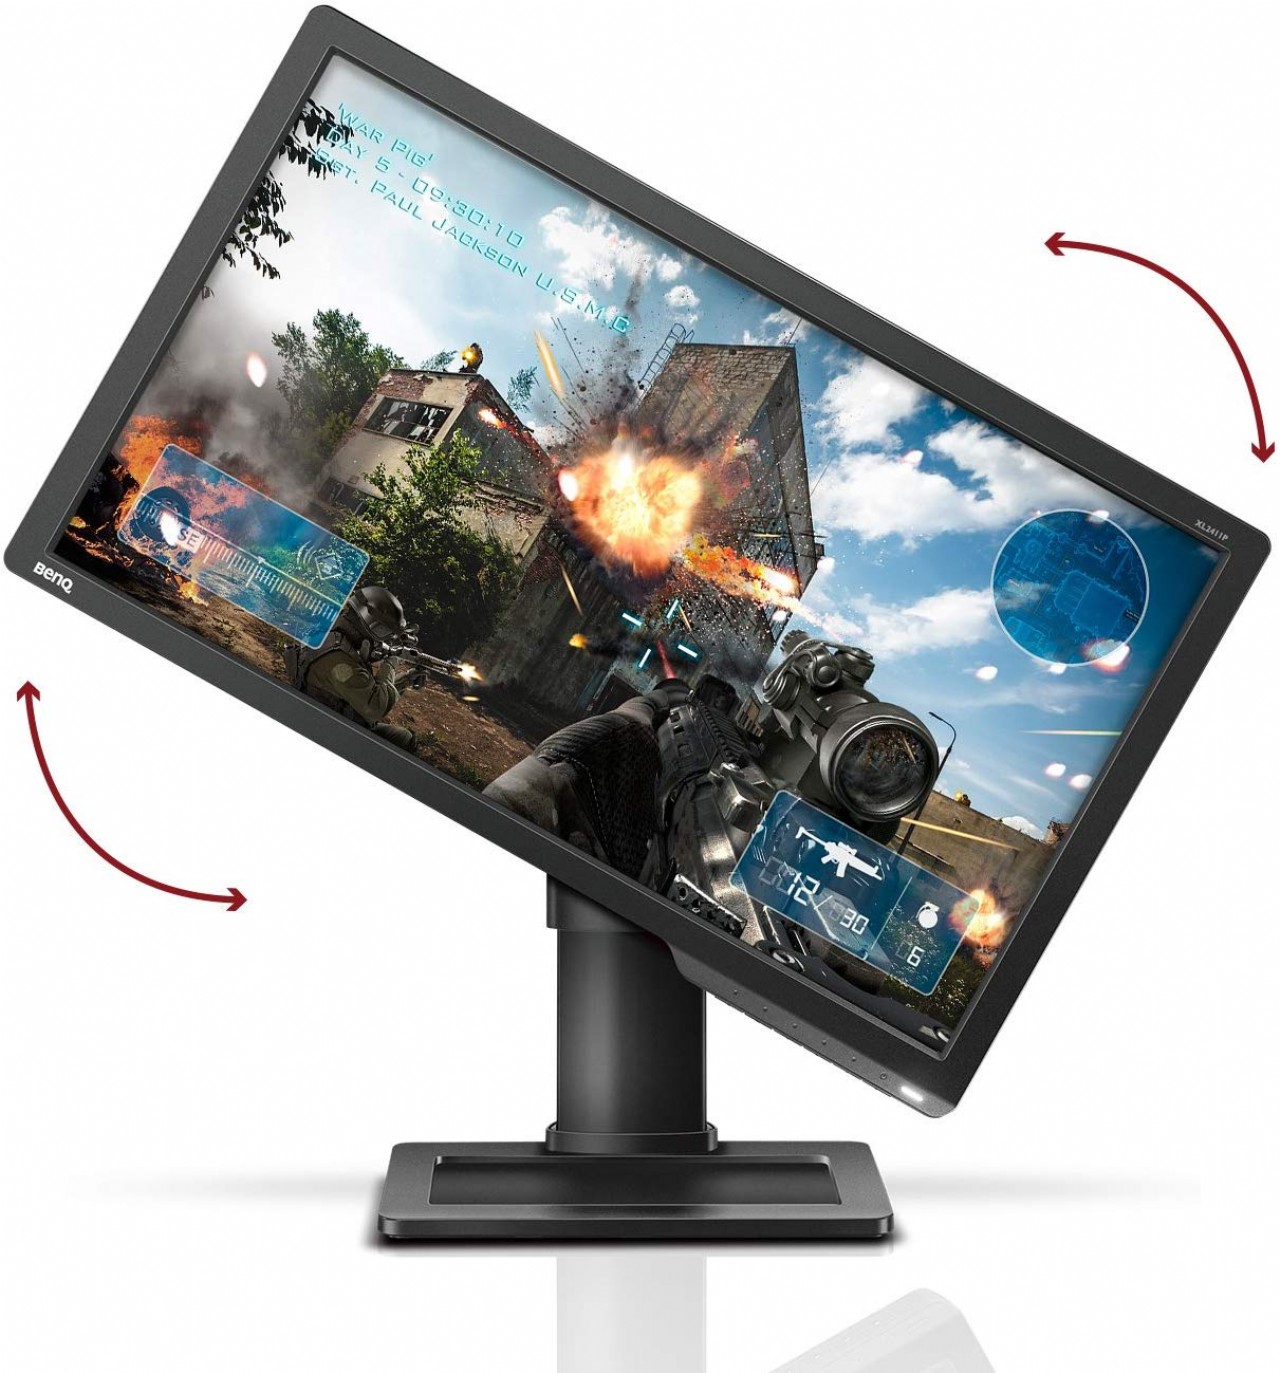 BenQ ZOWIE XL2411P 24 Inch 144Hz Gaming Monitor | 1080P 1ms | Black eQualizer & Color Vibrance